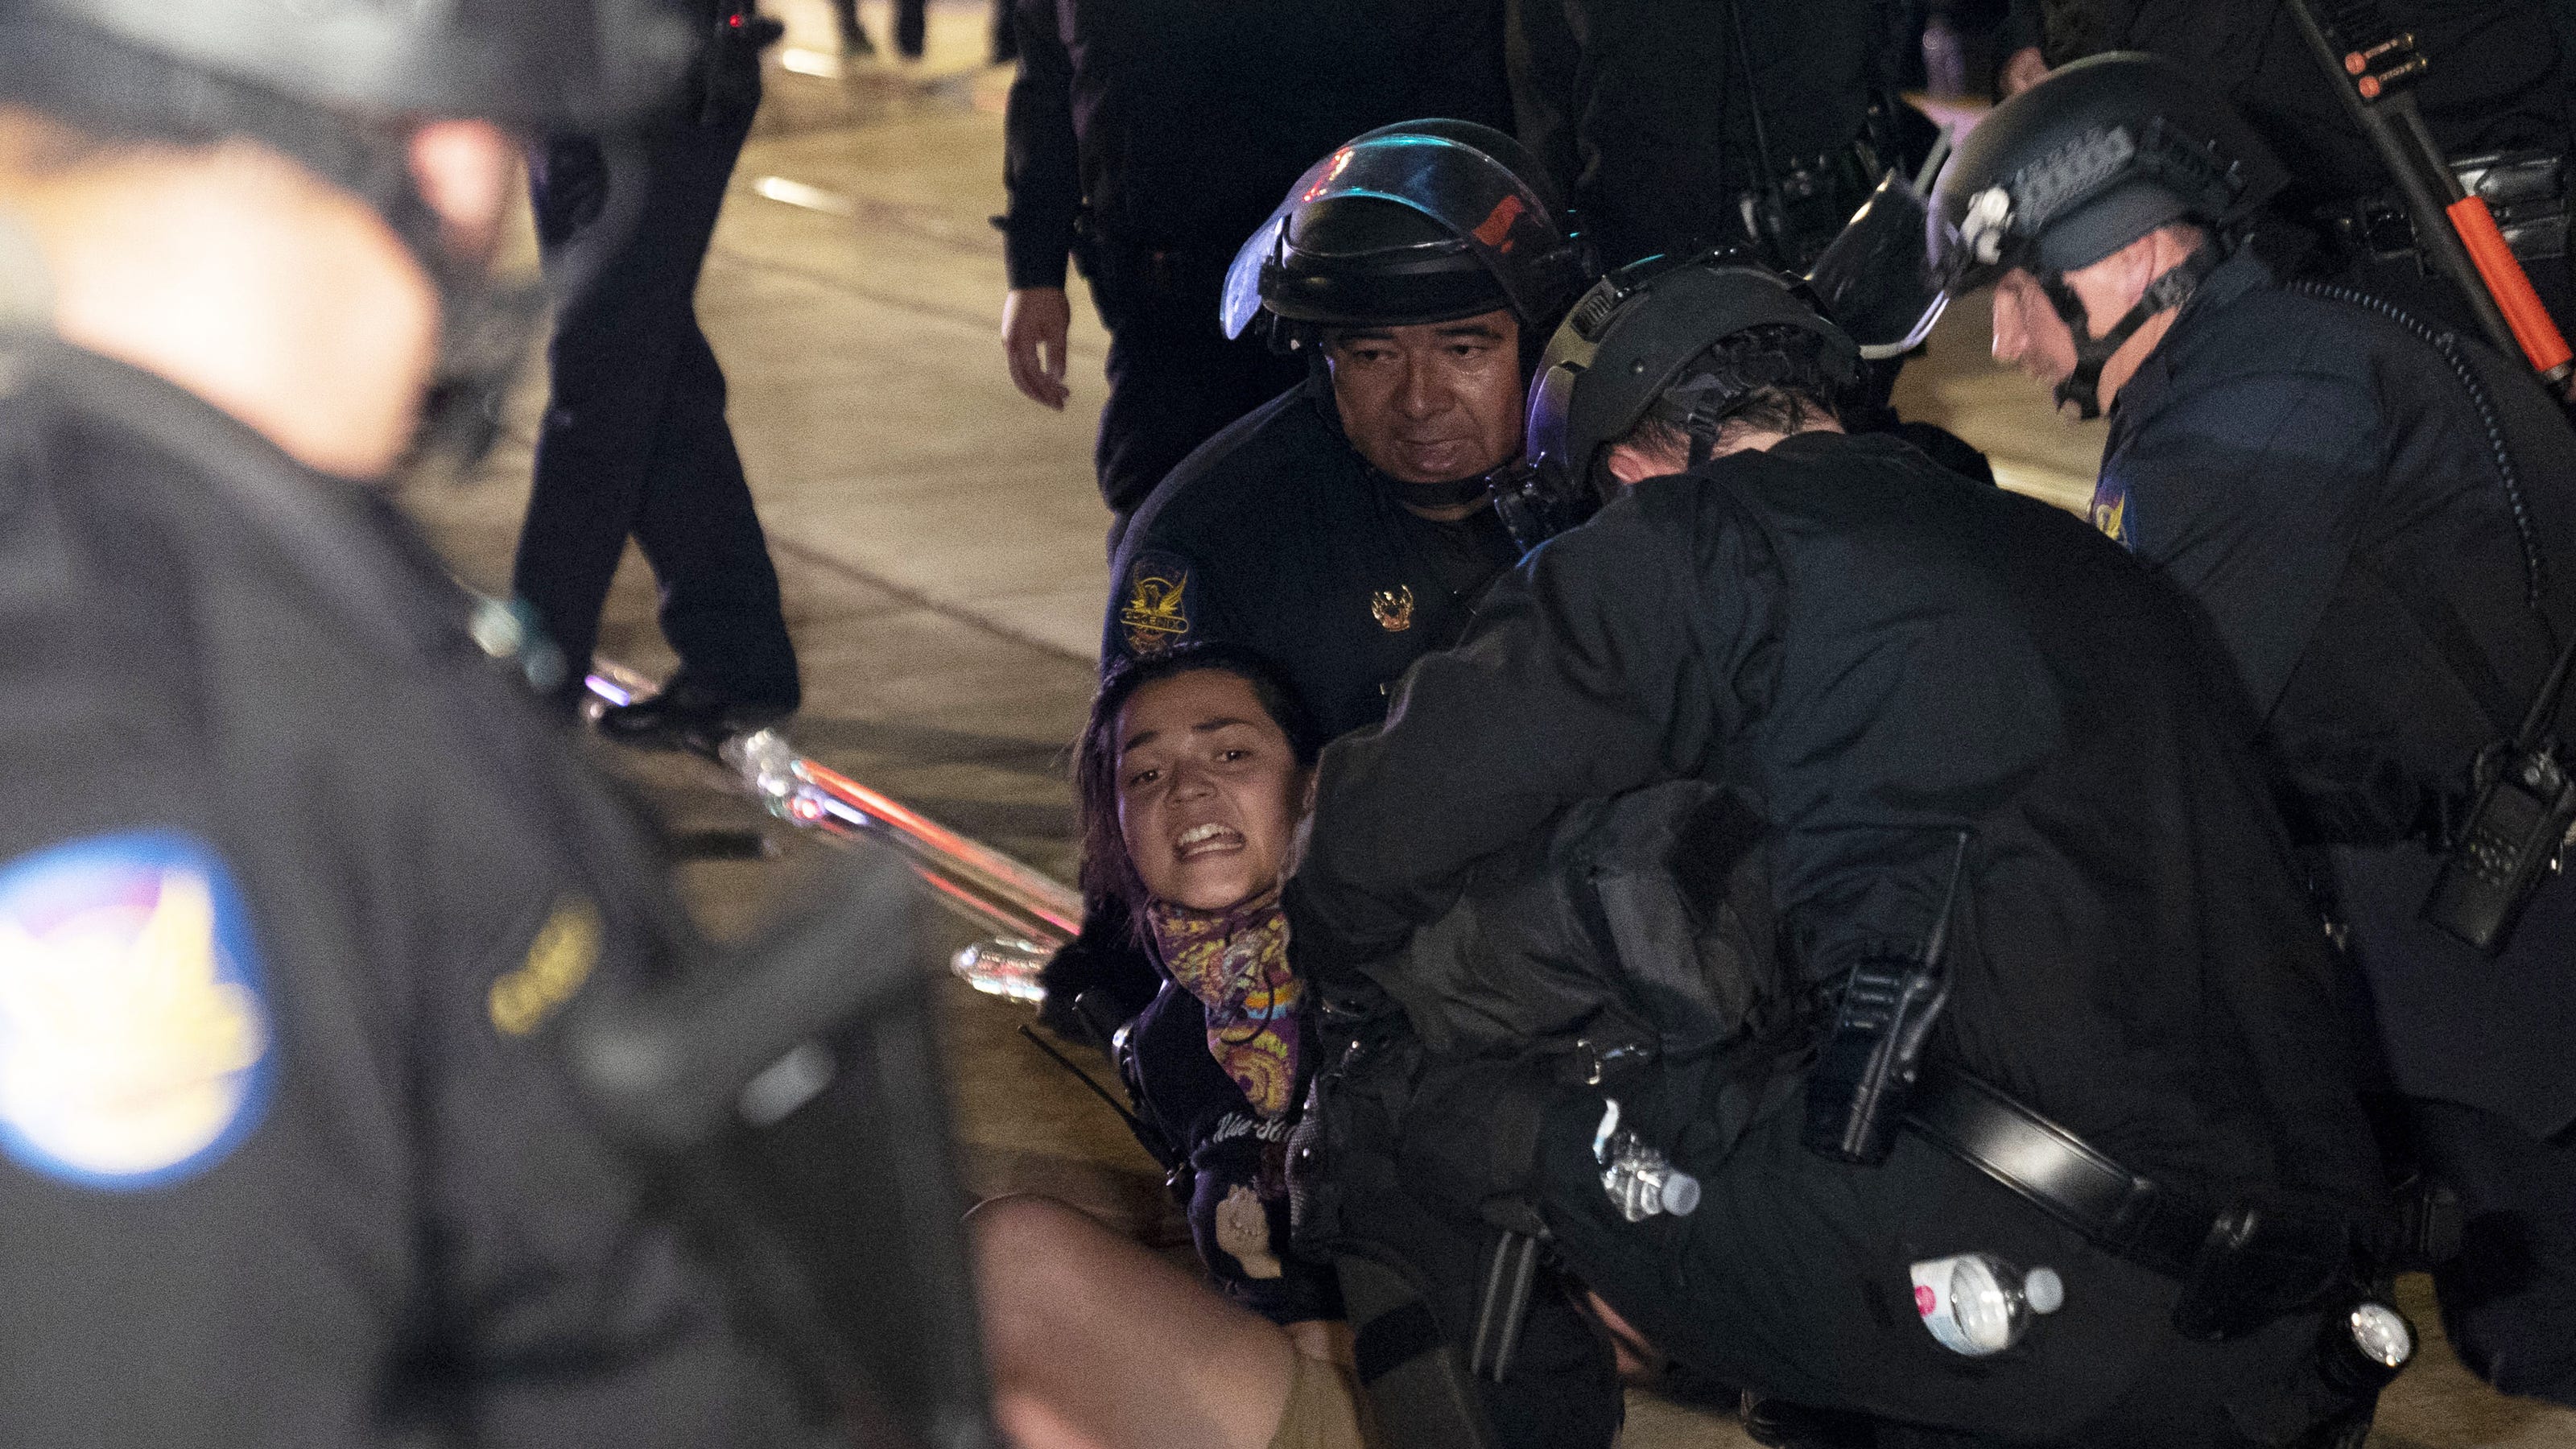 Phoenix police identify 16 people arrested in Friday ICE protest